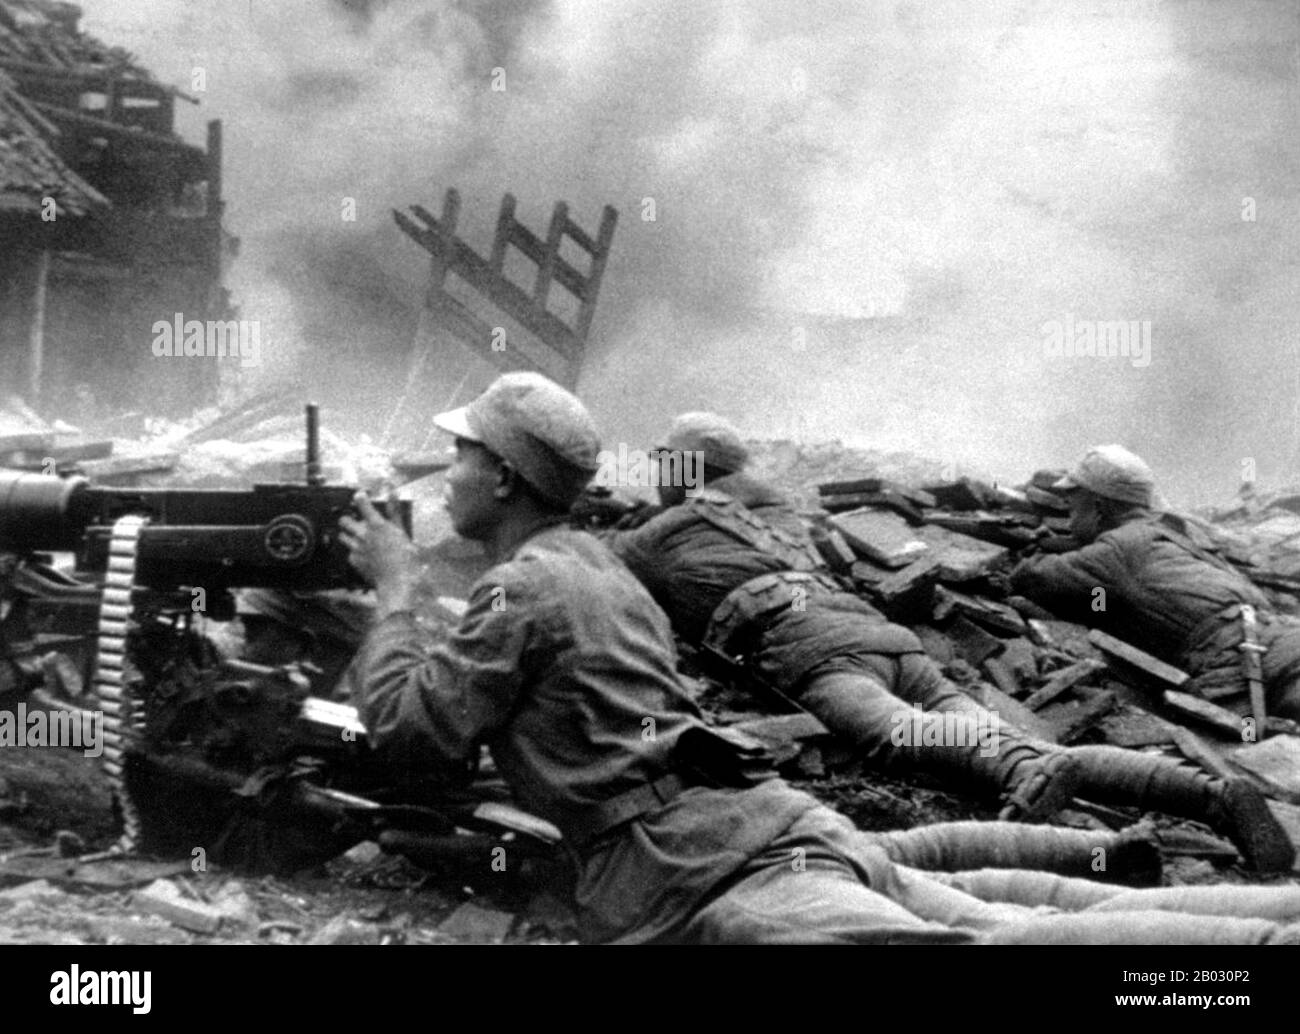 Chinese troops of the National Revolutionary Army fire on Japanese positions during the Battle of Changde, the strategic city in the heart of China’s rice-growing area. Although the Japanese army initially successfully captured the city, the Chinese 57th Division was able to pin them down long enough for reinforcements to arrive and encircle the Japanese. The Chinese Army then cut off the Japanese supply lines, forcing them into retreat. Changde, Hunan, Republic of China. November 1943. Stock Photo